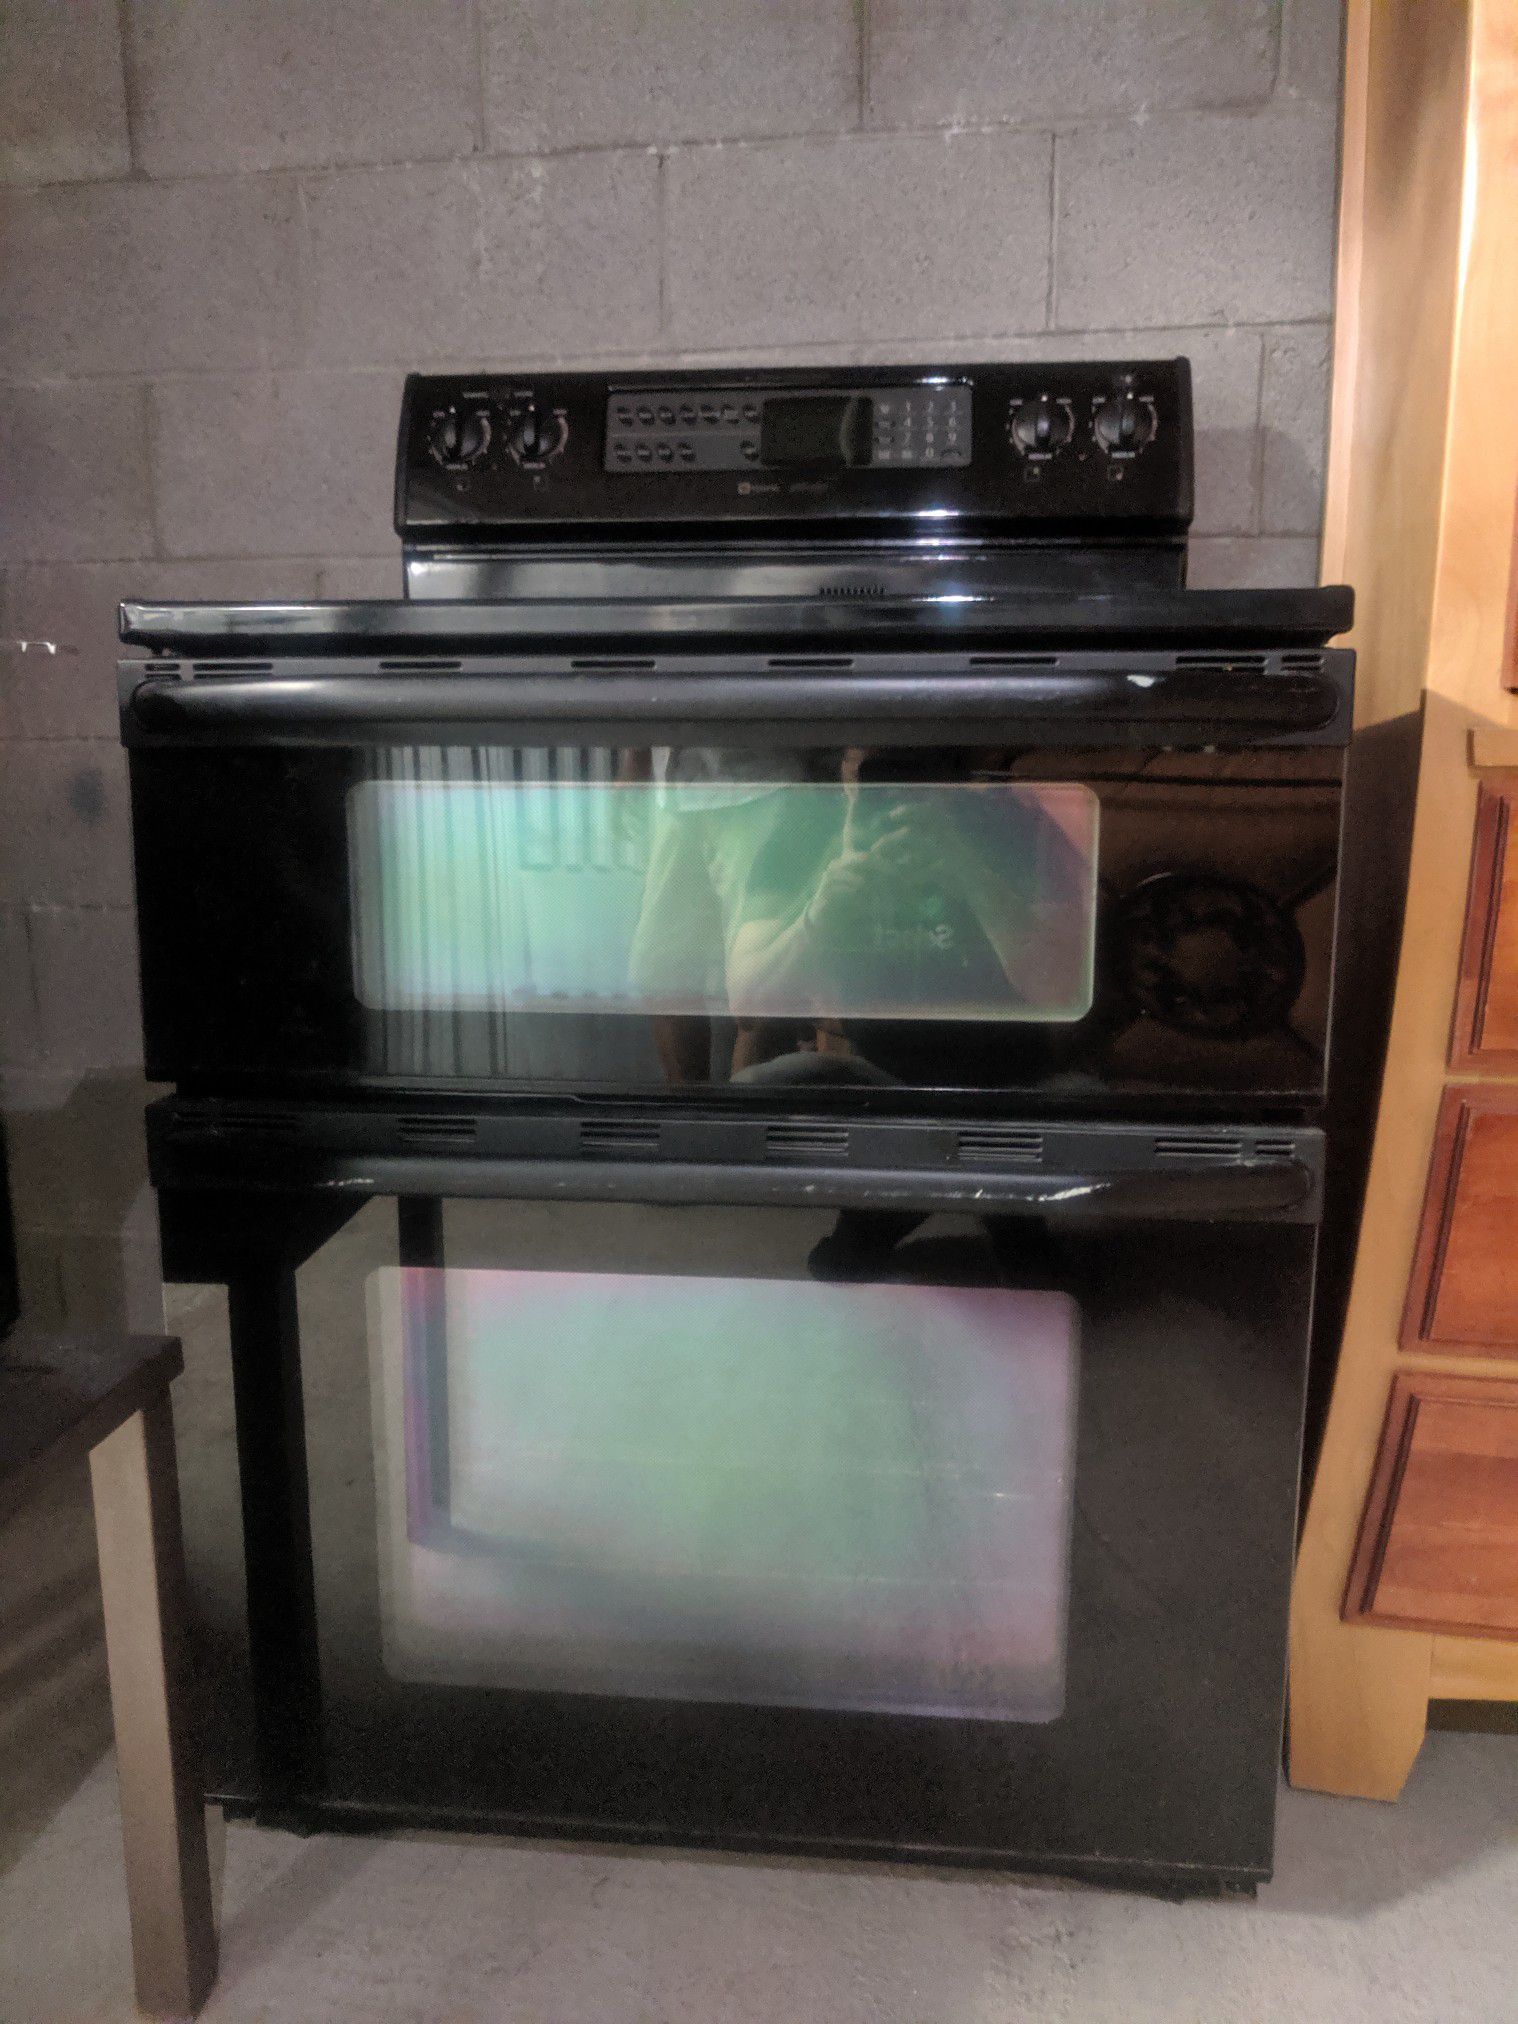 Maytag double oven electric Range